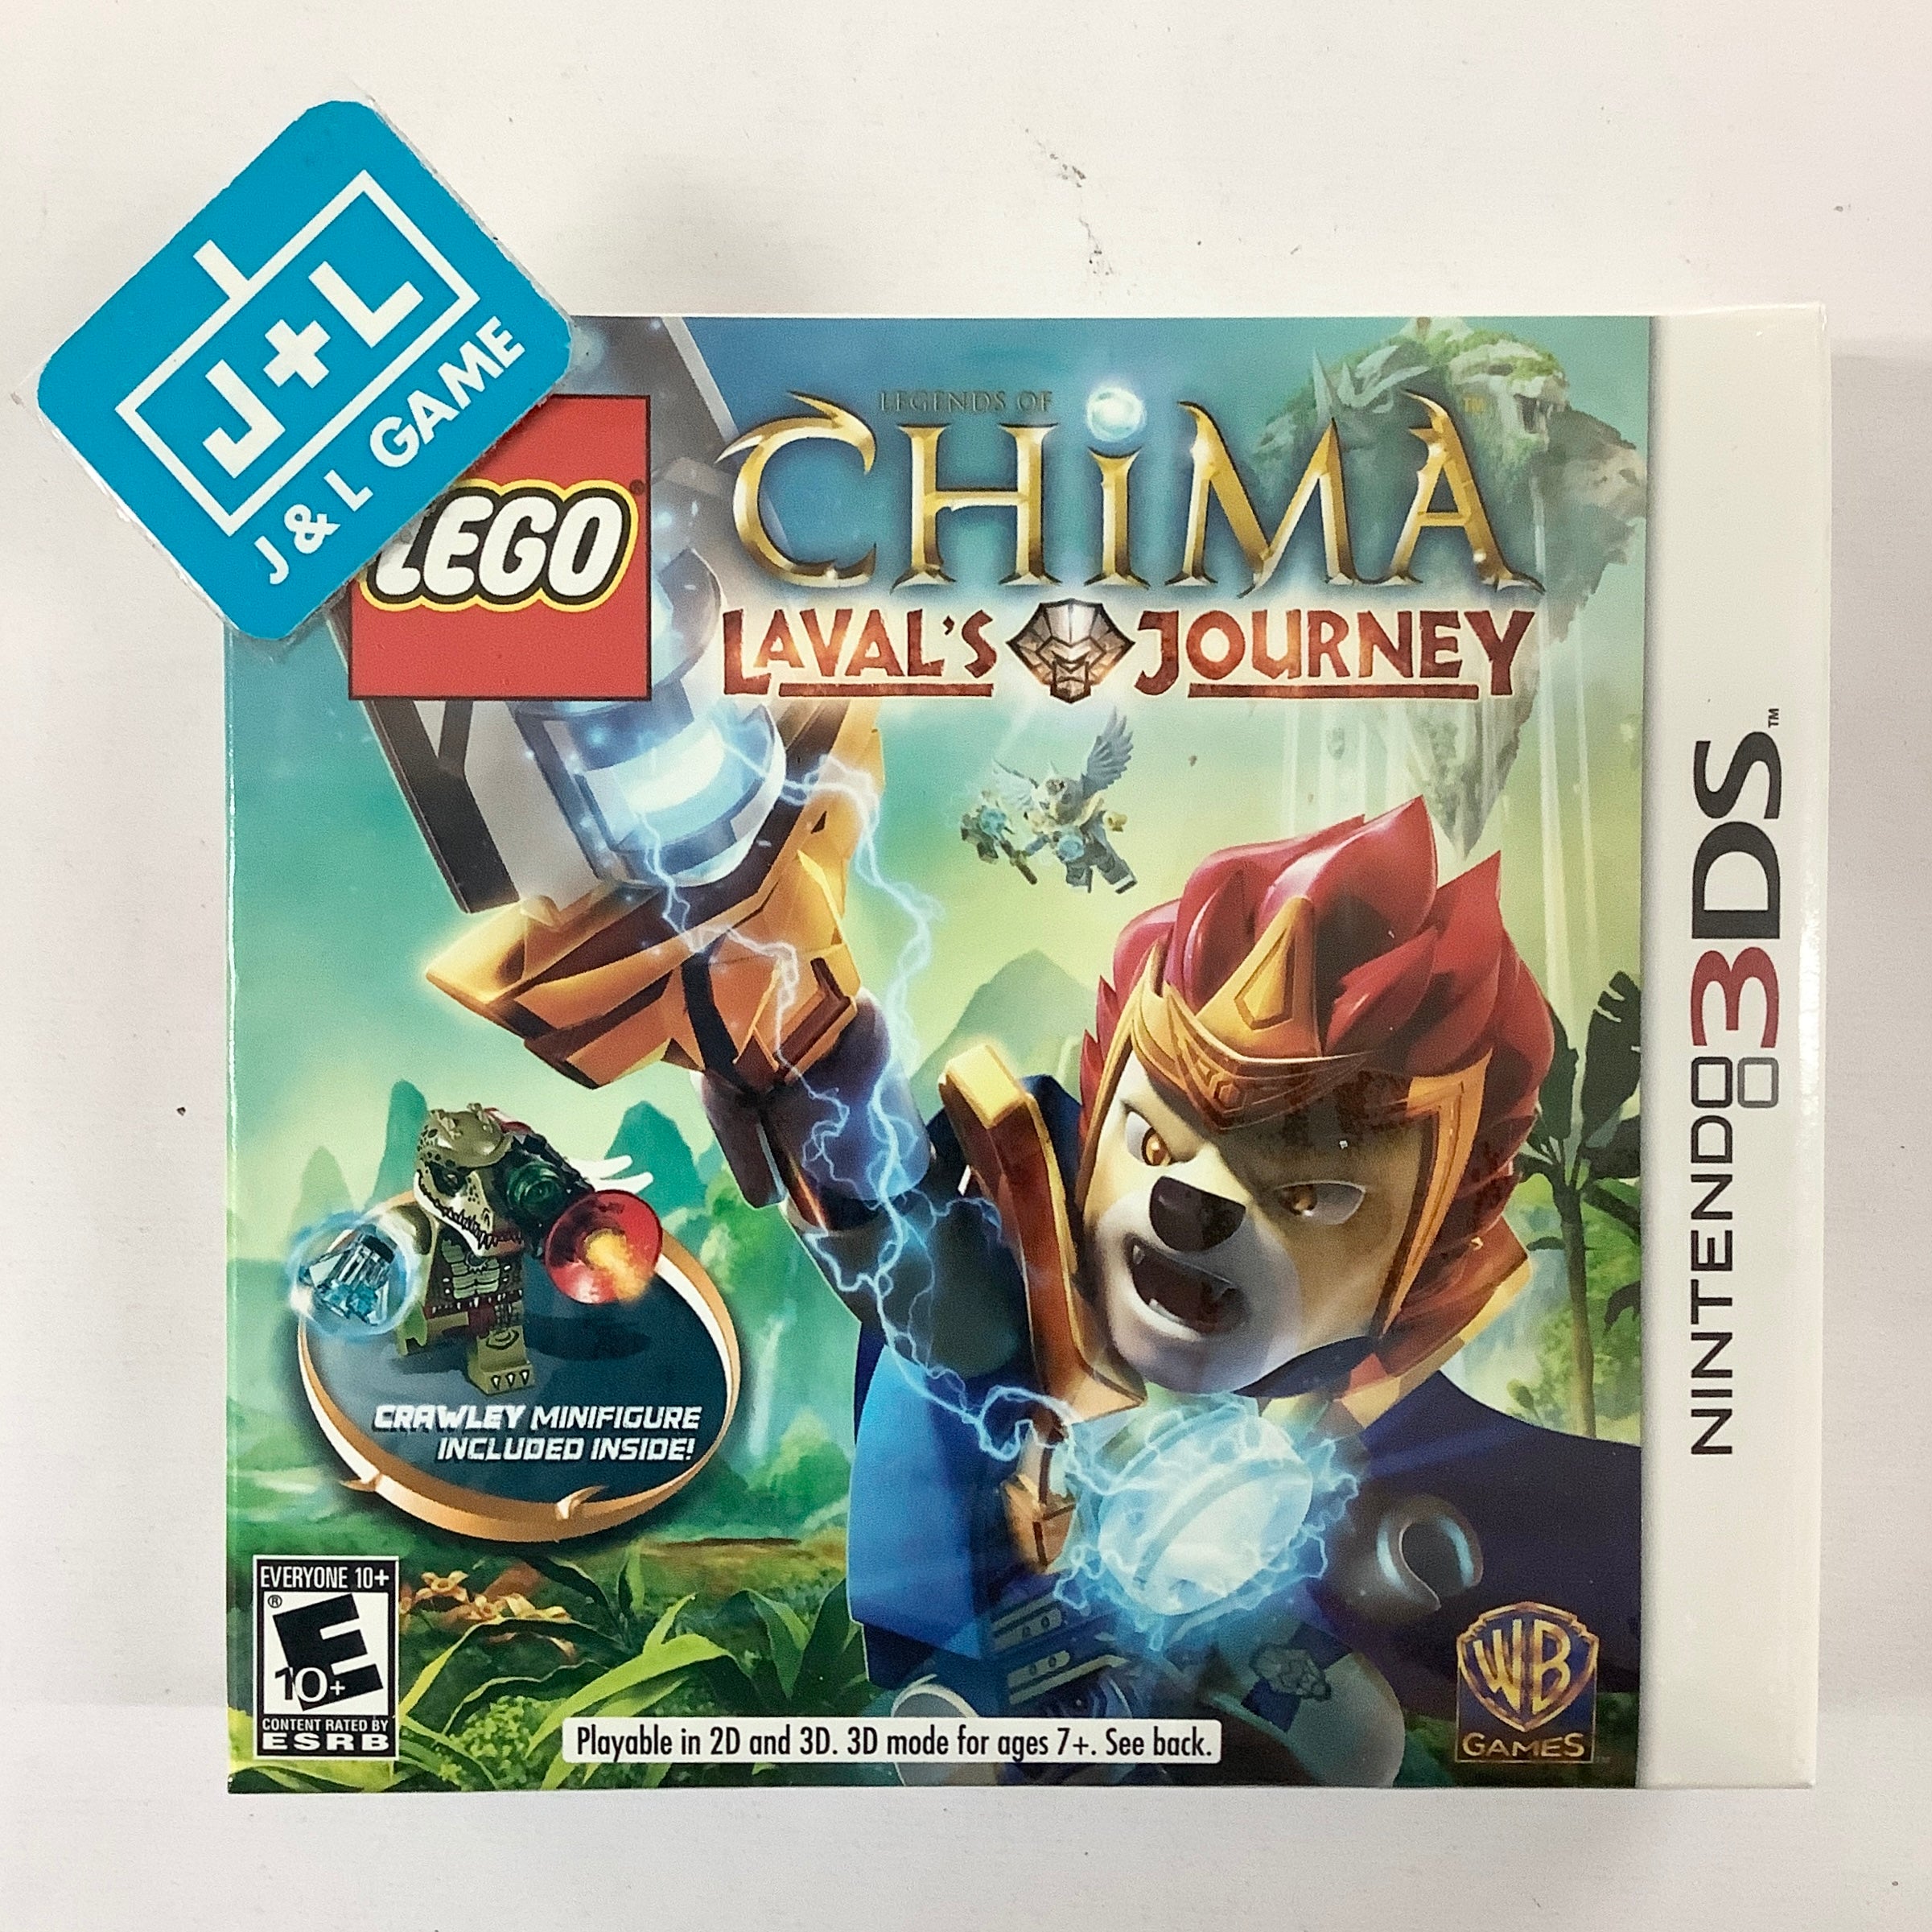 LEGO Legends of Chima: Laval's Journey (with Crawley Minifigure) - Nintendo 3DS